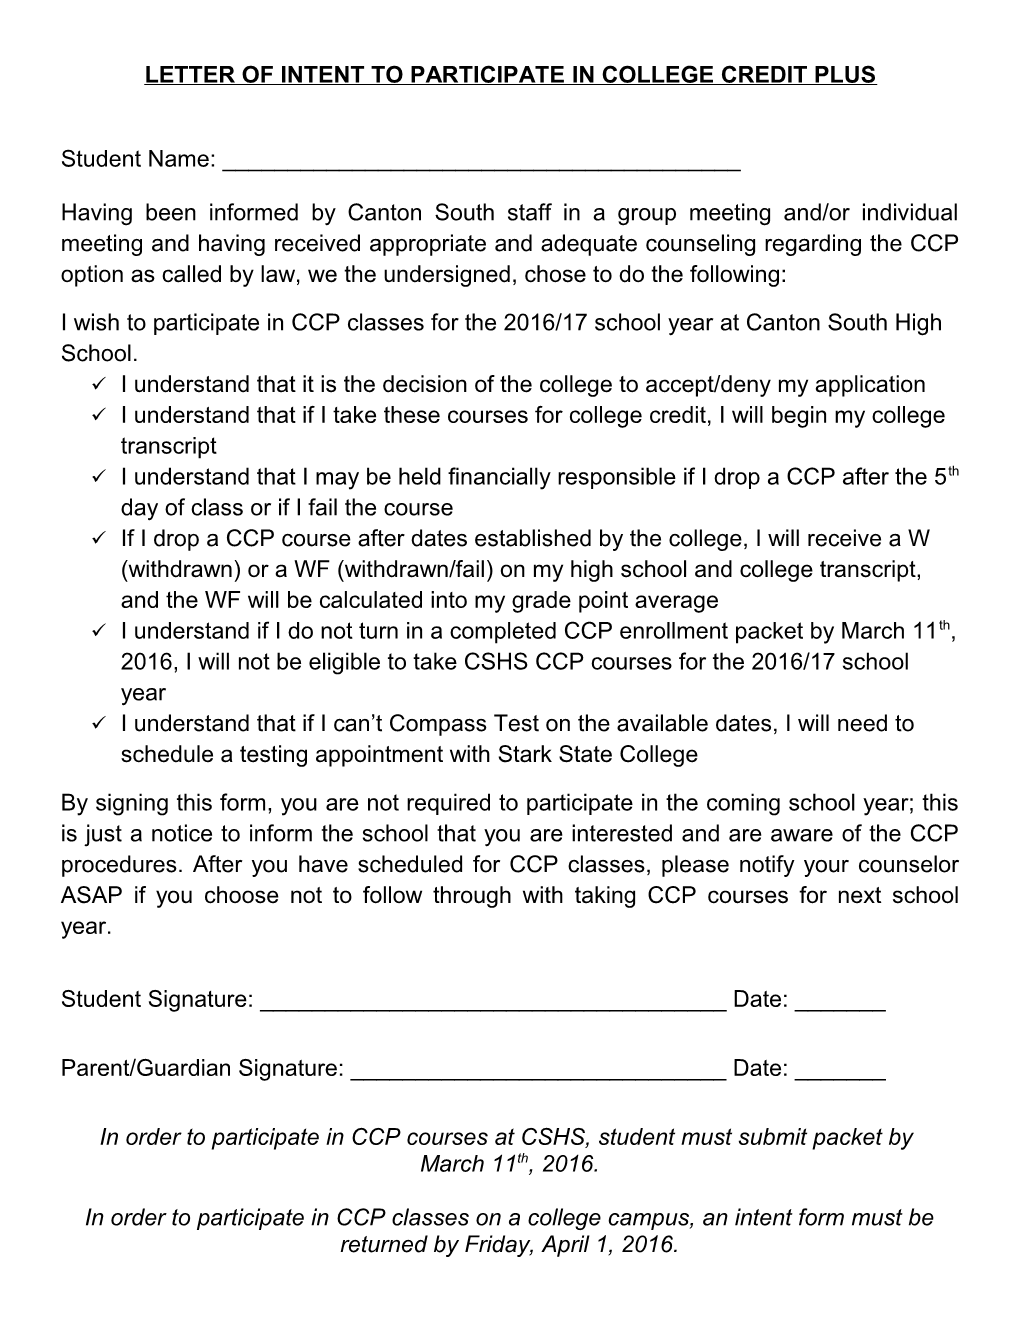 Letter of Intent to Participate in College Credit Plus